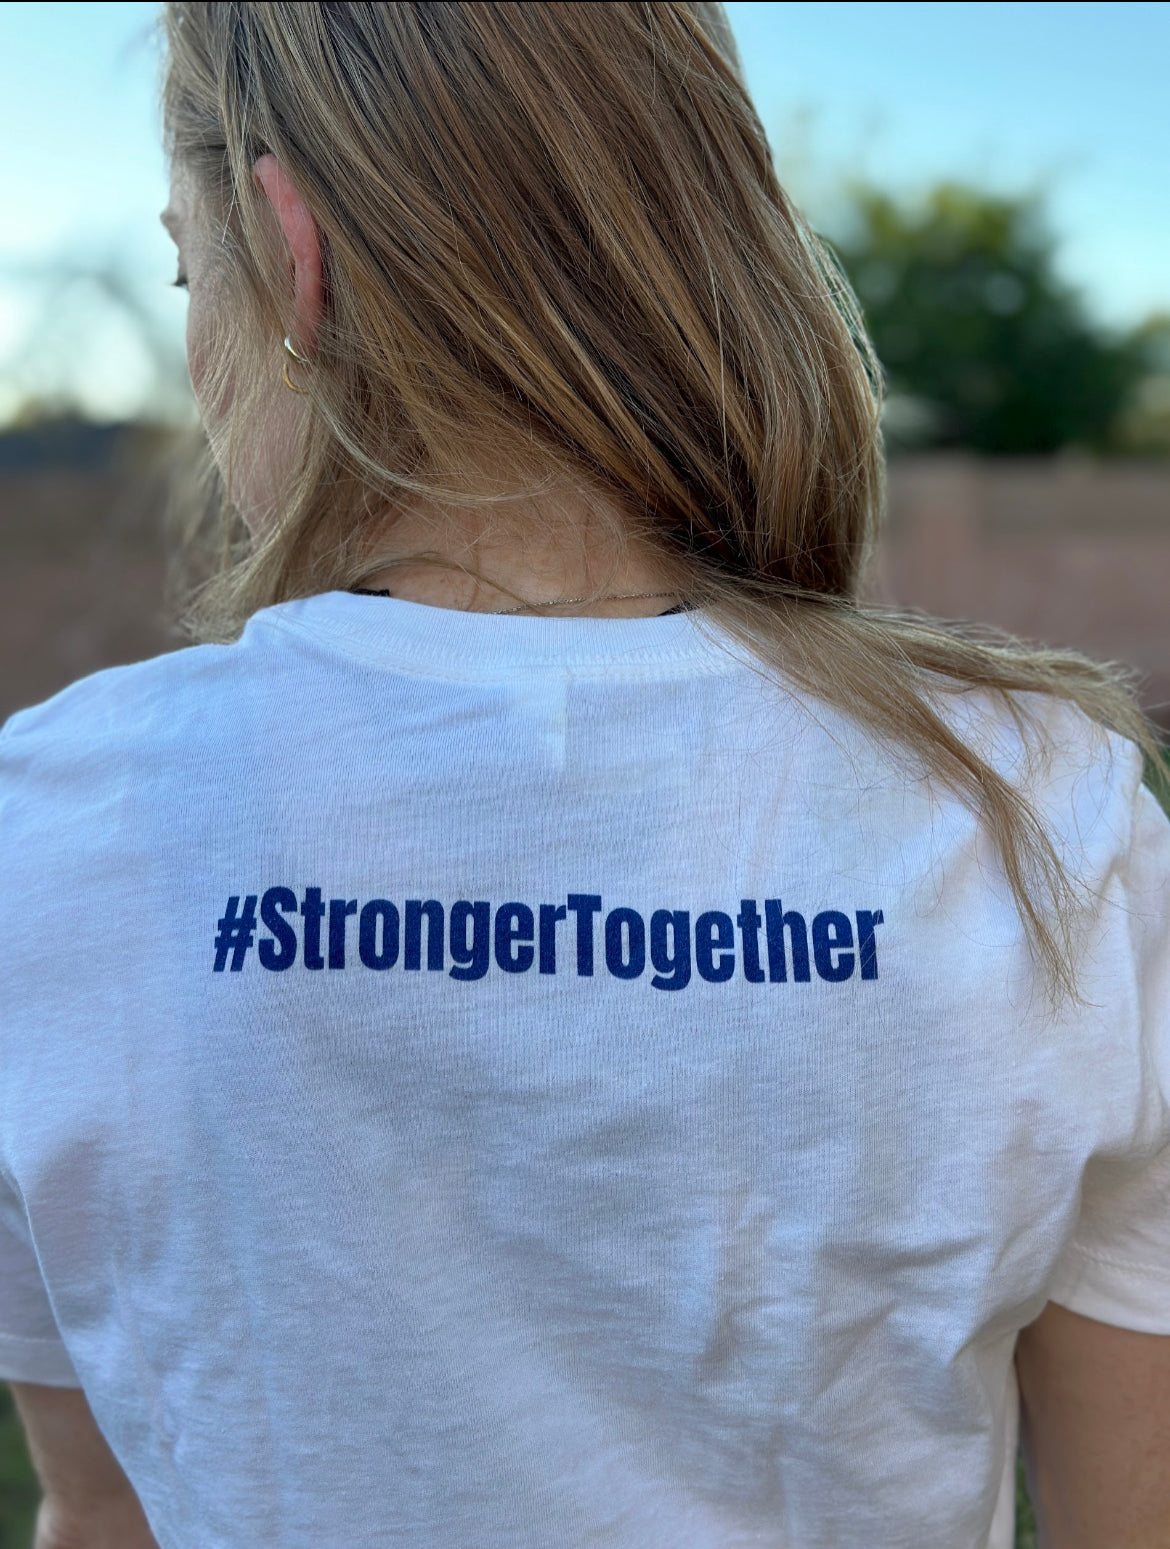 I LIFT FOR ISRAEL- Women’s short sleeves shirt limited edition with #StrongerTogether back print